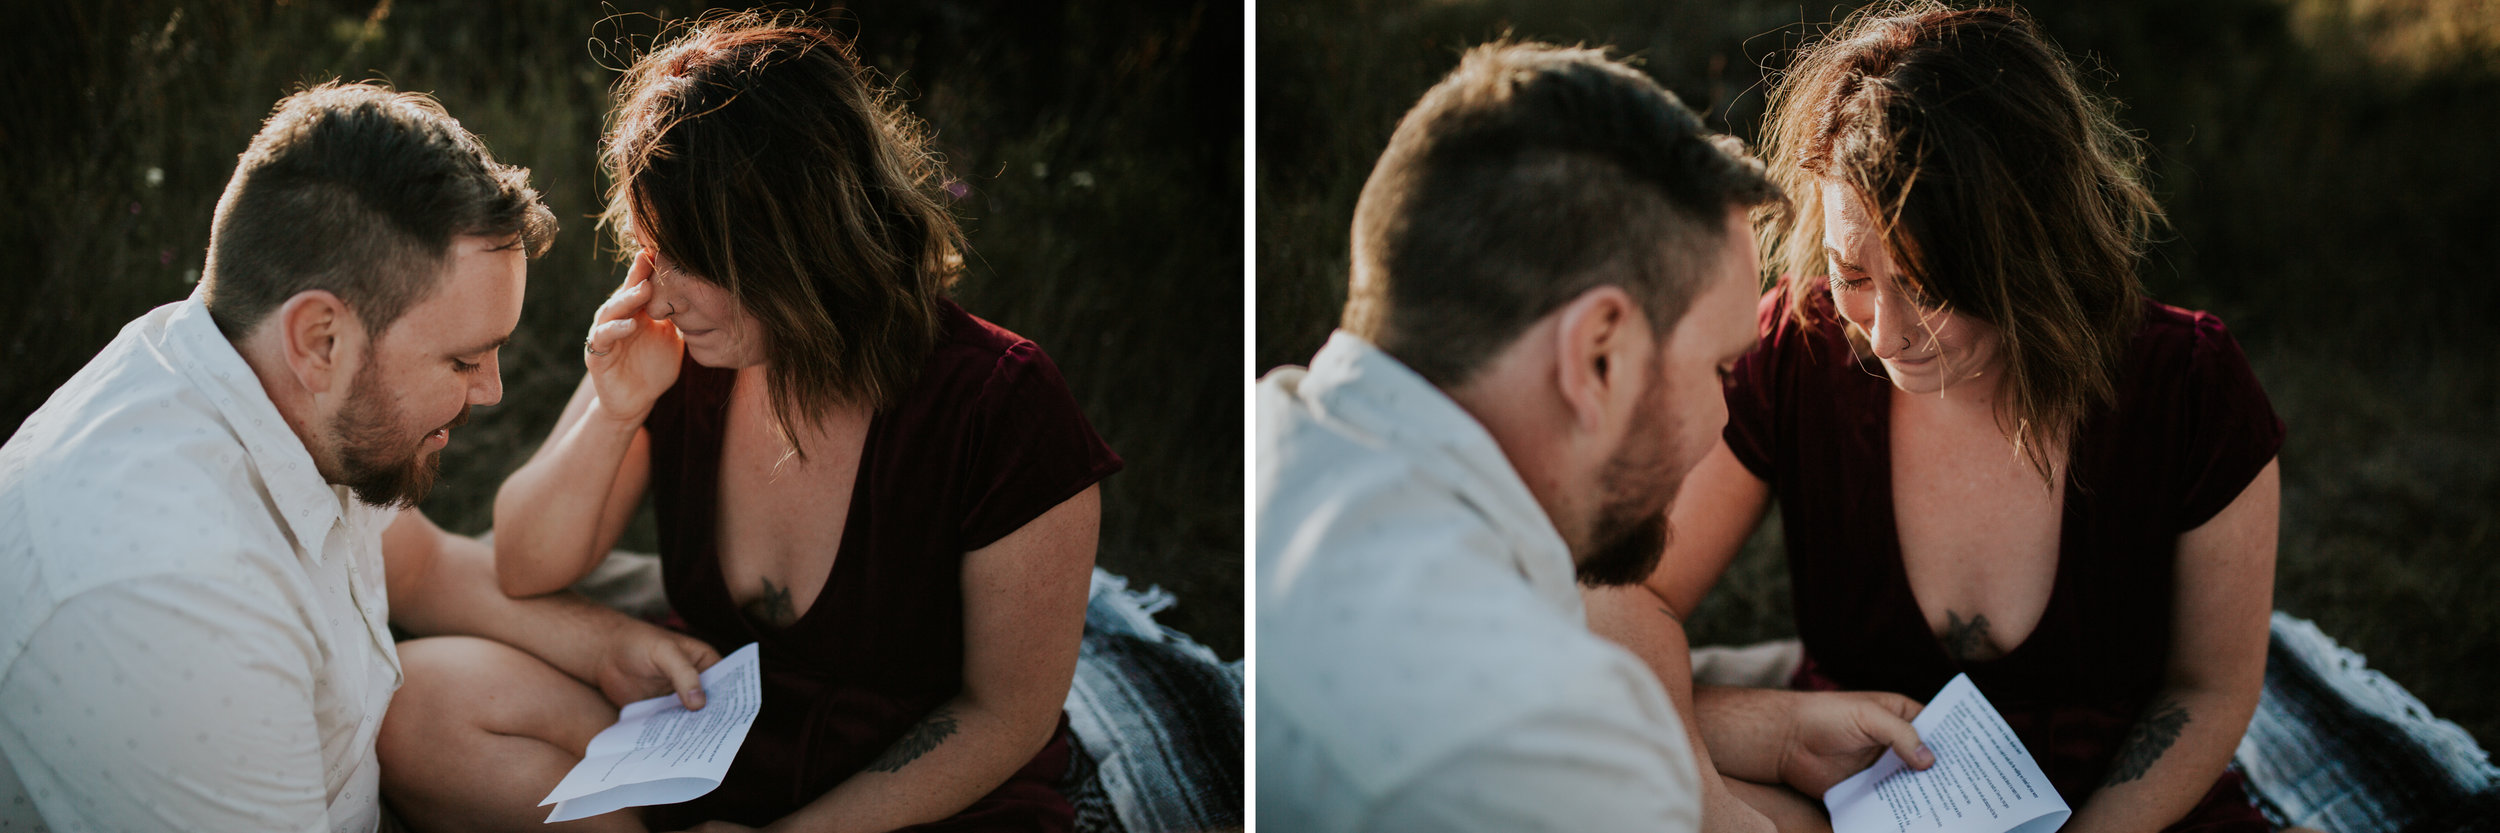 Sarah+Grant+Anniversary+Couple+session+Southern+highlands-7.jpg